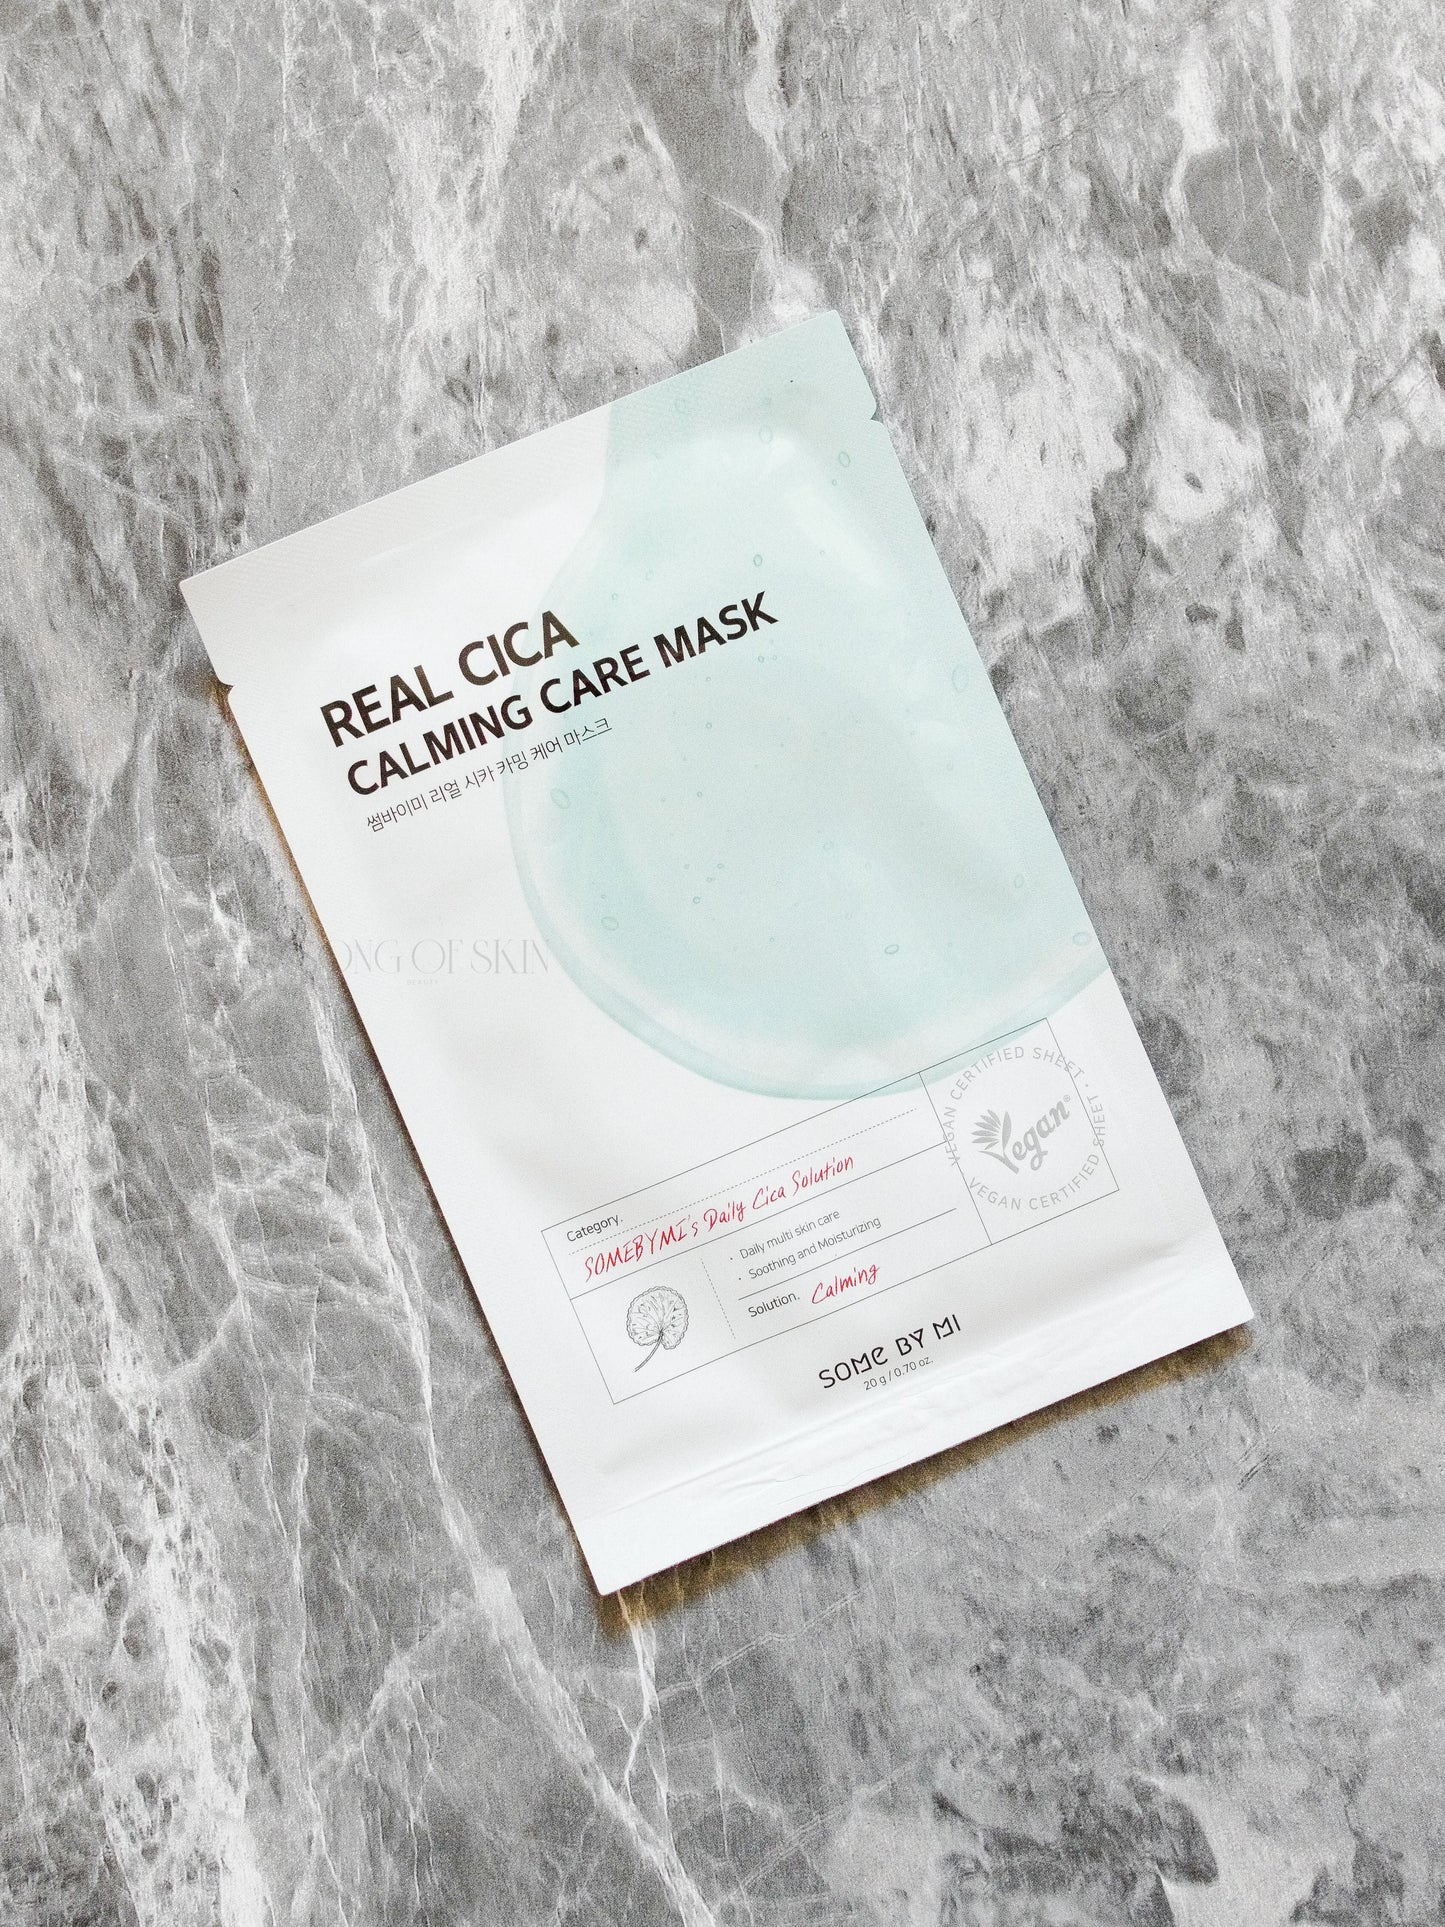 Some By Mi Real Cica Calming Care Mask - 1pc